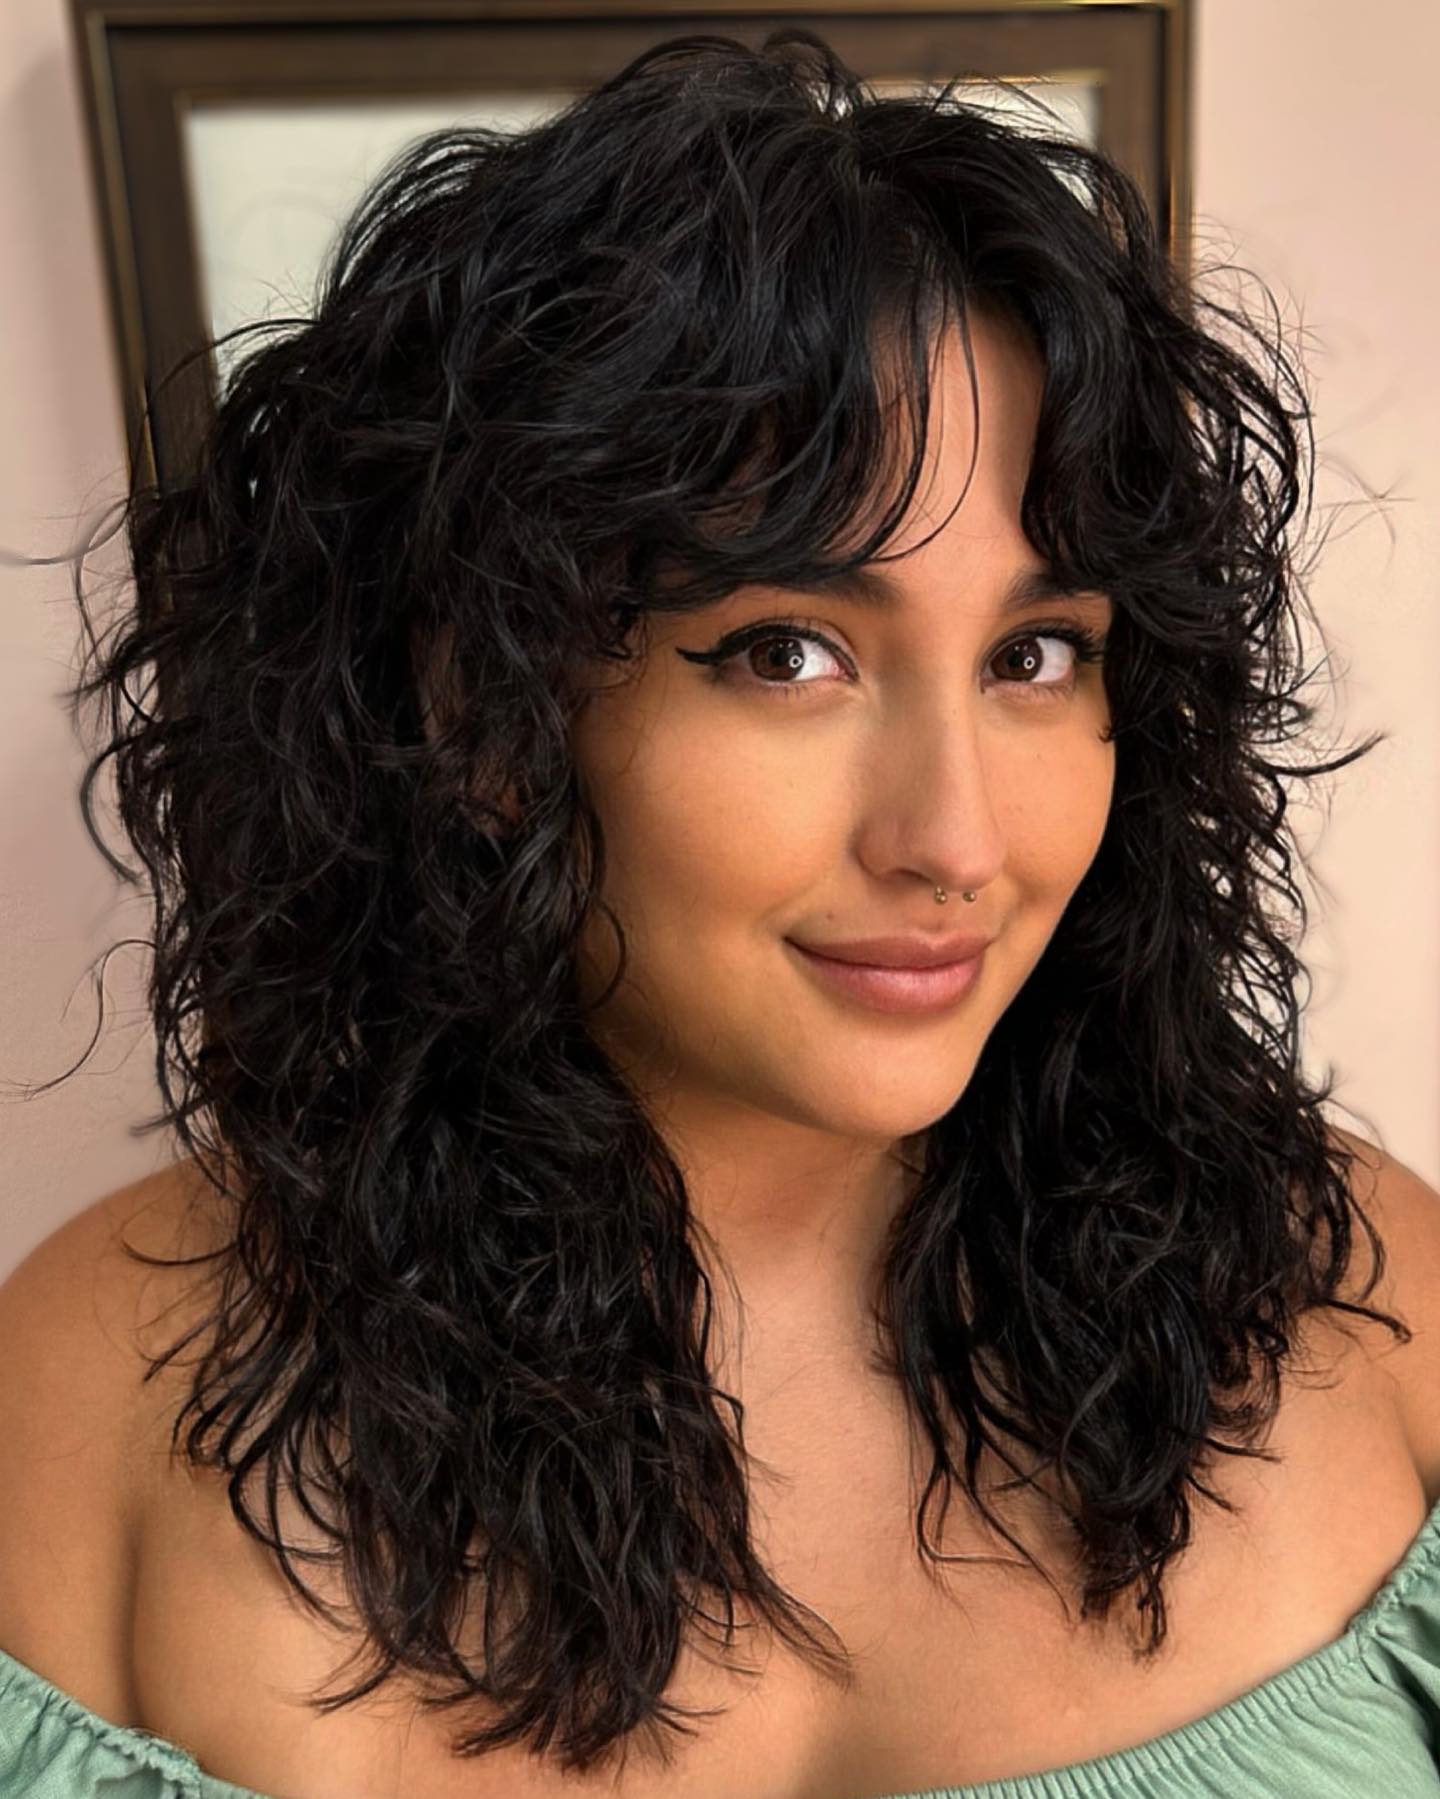 Curly Black Hair with Curtain Bang